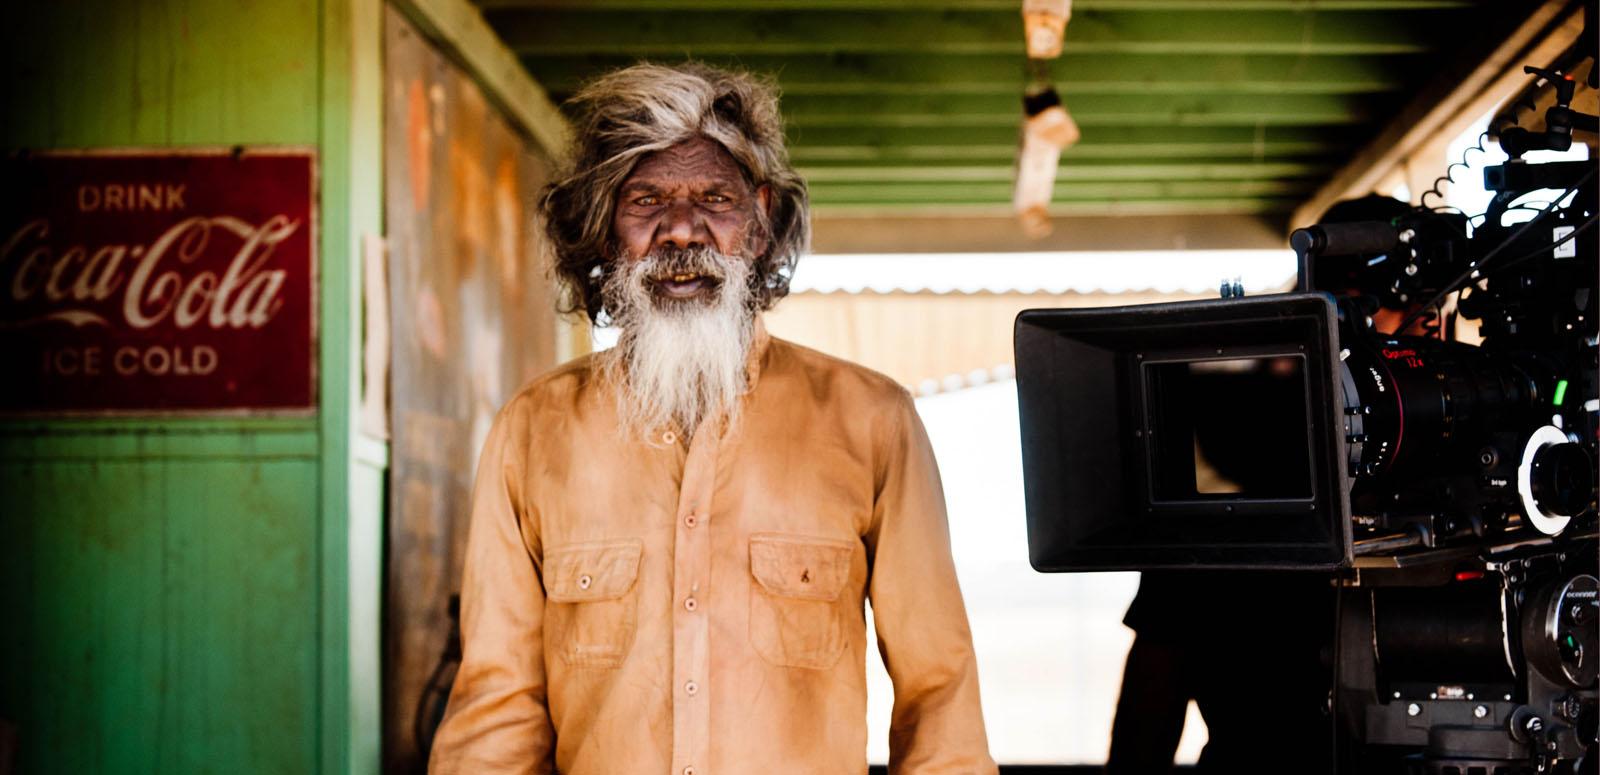 David Gulpilil on the set of Satellite Boy with a film camera beside him. He is looking directly at the camera.